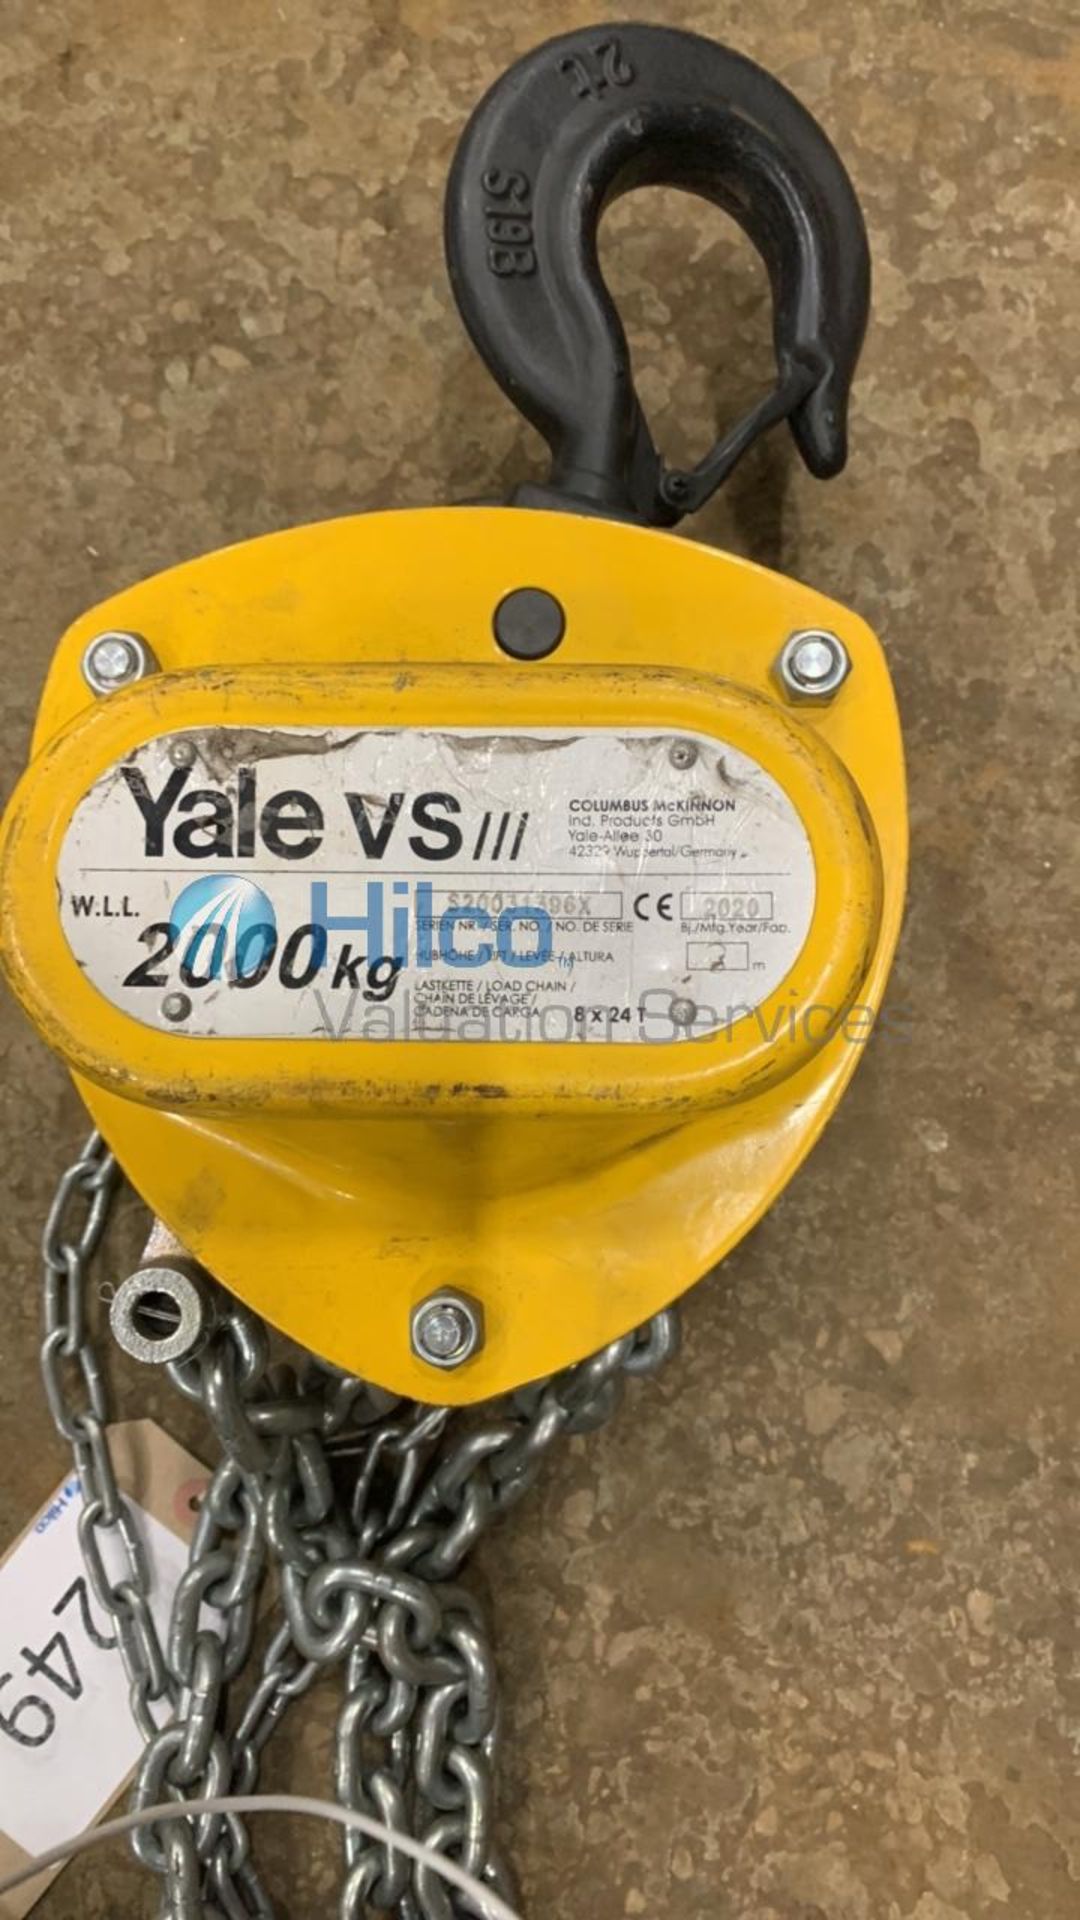 Yale 2000kg Manual Chain Hoist, Serial No S20031396X (2020) - Image 2 of 3